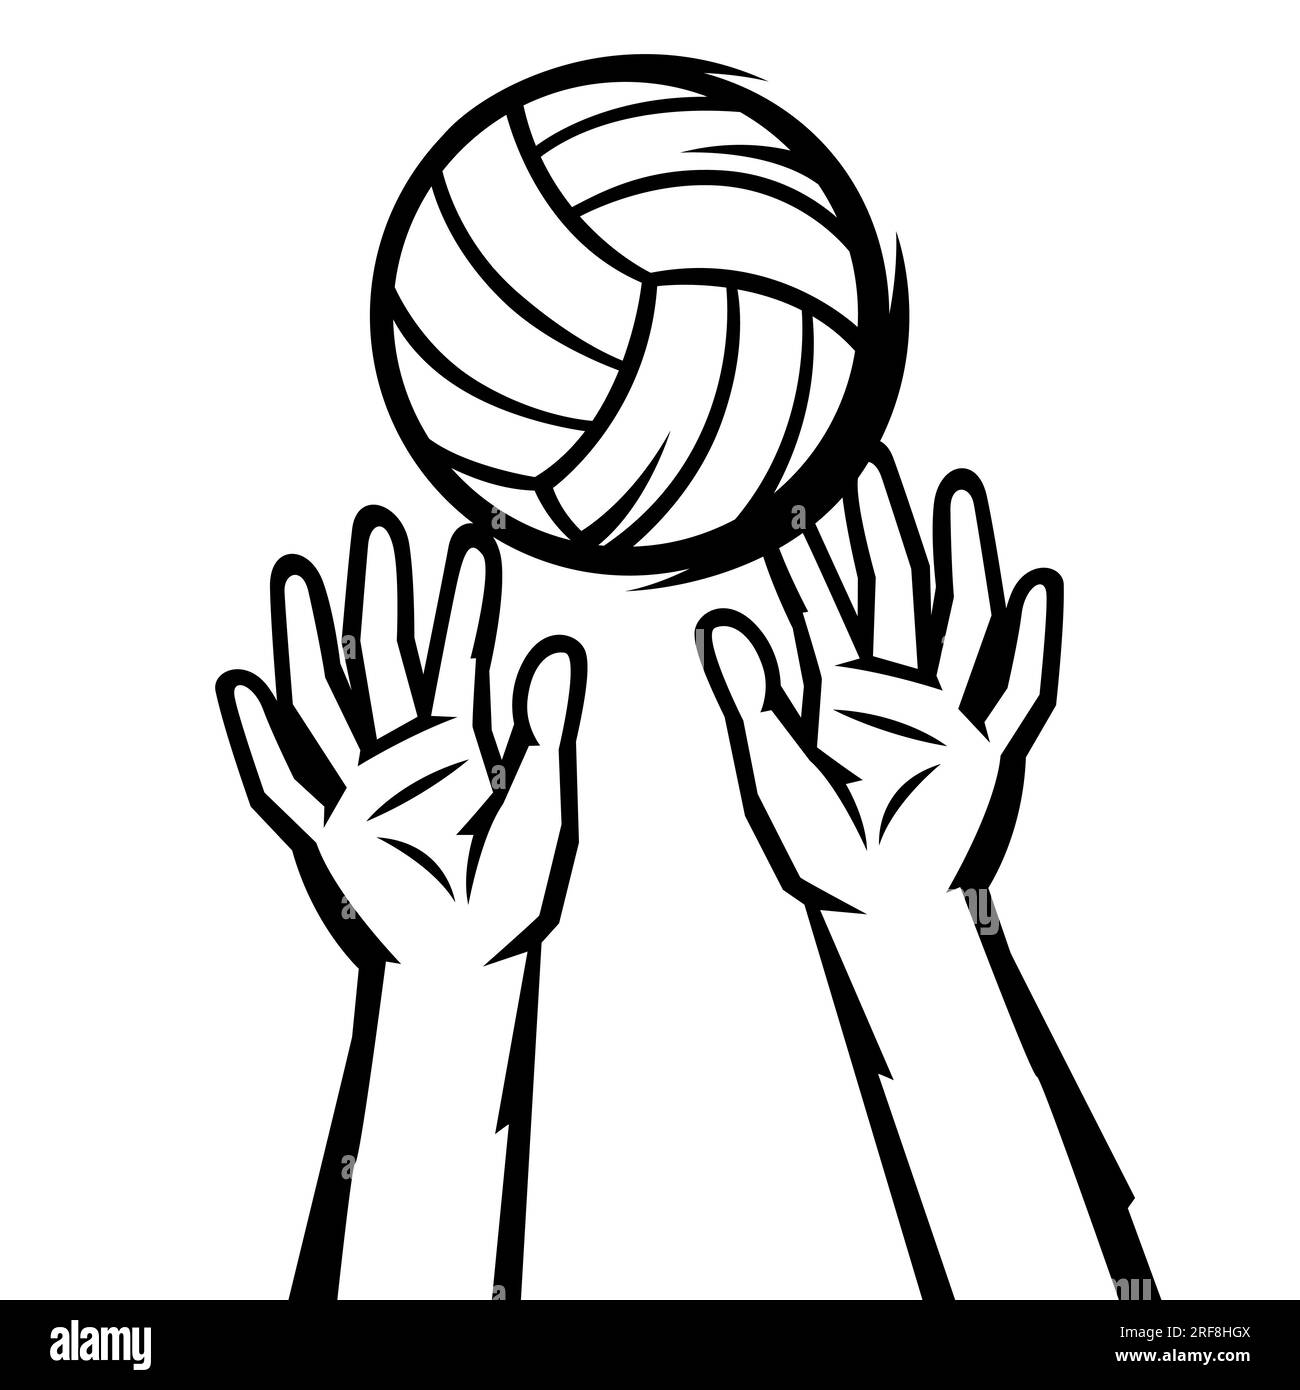 Beach volleyball court Black and White Stock Photos & Images - Alamy